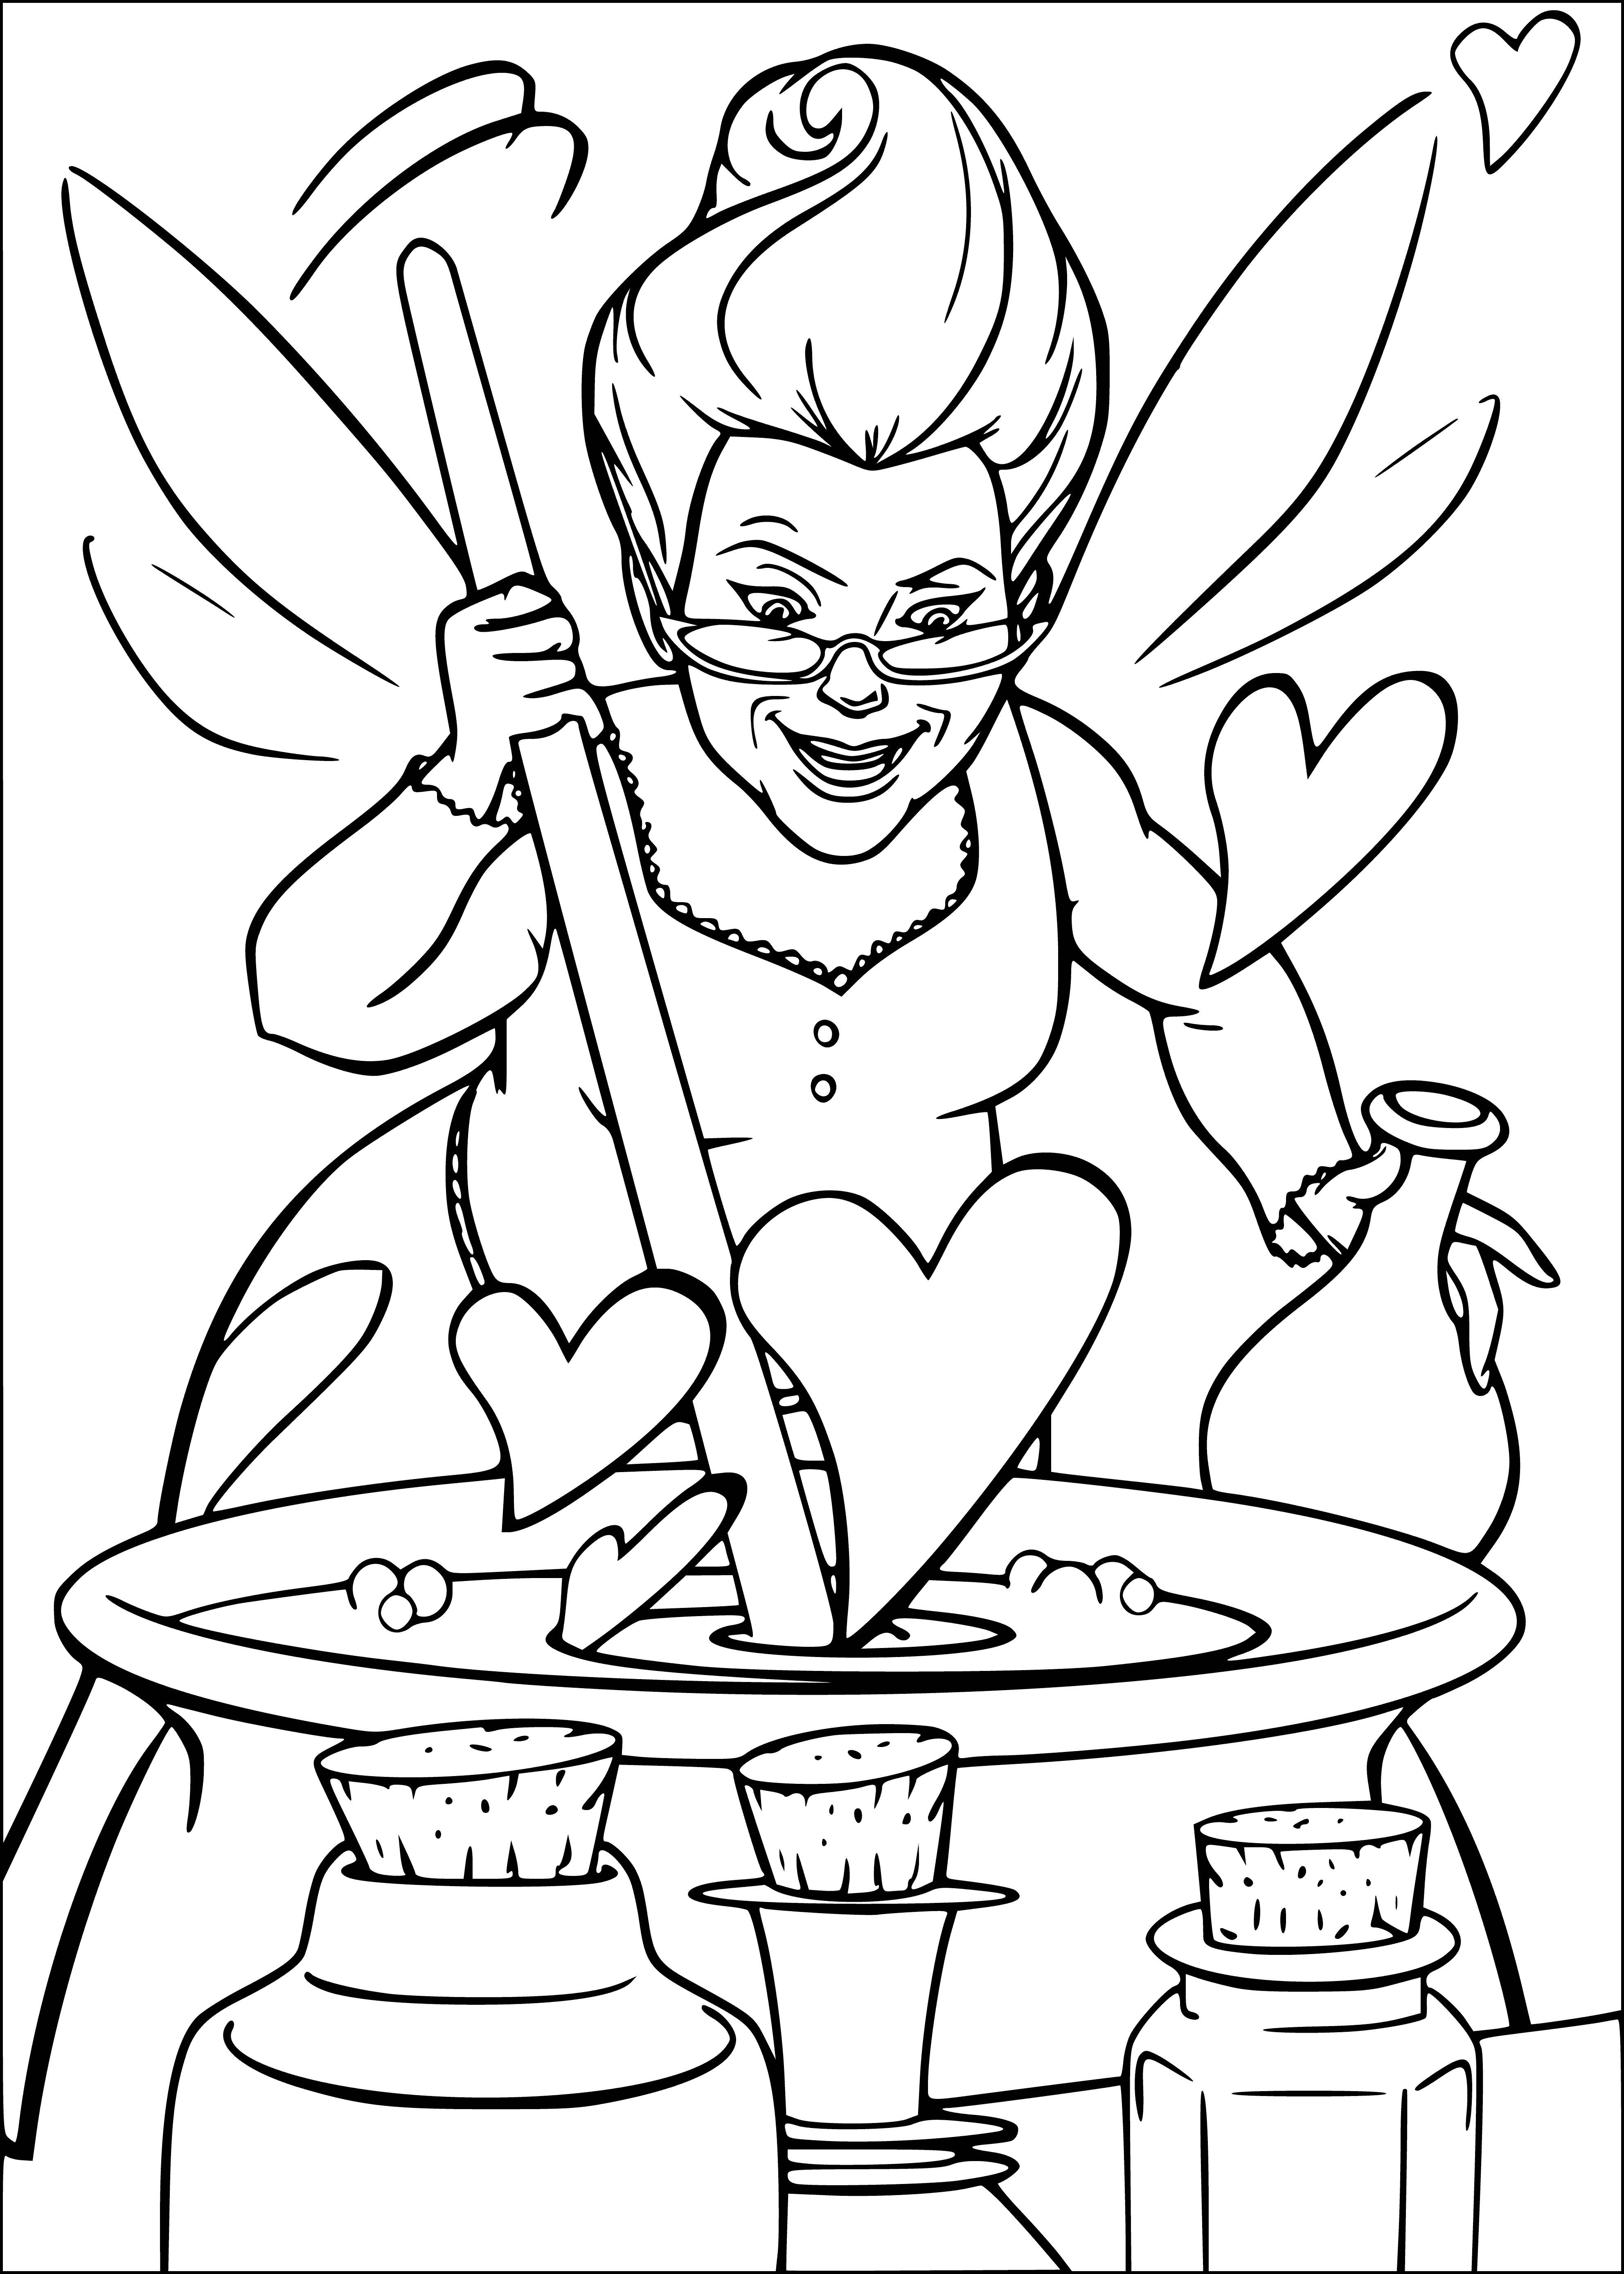 coloring page: Woman with blonde hair, pink dress and wand surrounded by small animals.